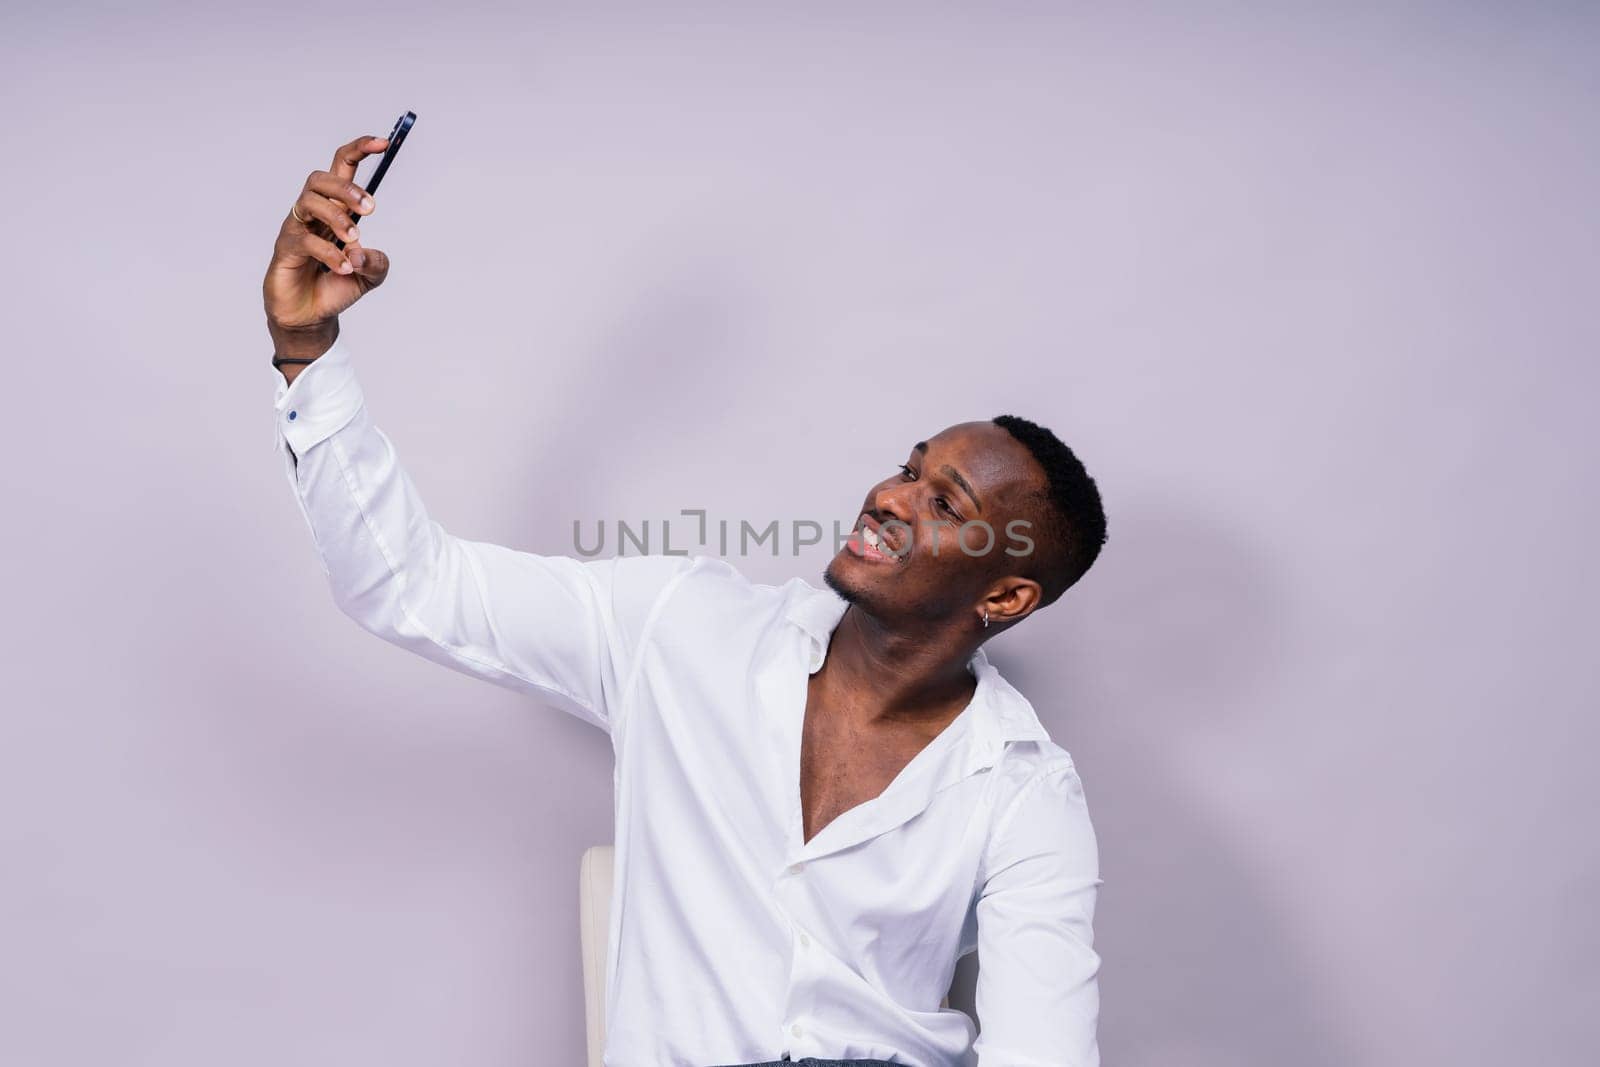 Handsome excited young african business man with a mobile phone isolated over gray background